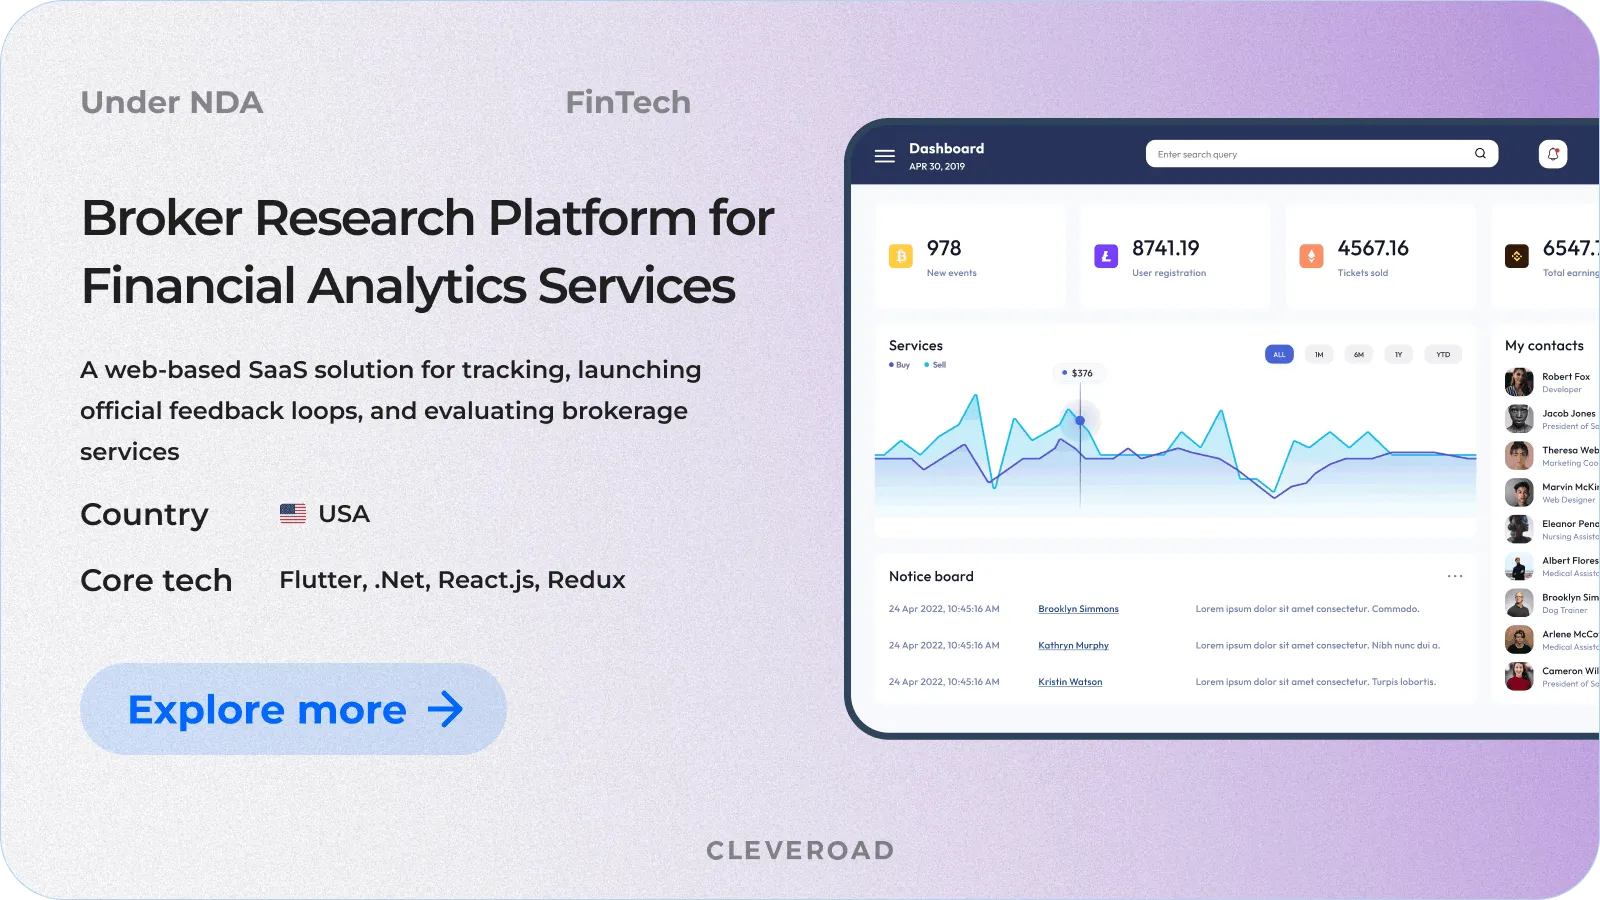 Research platform for brokerage services developed by Cleveroad